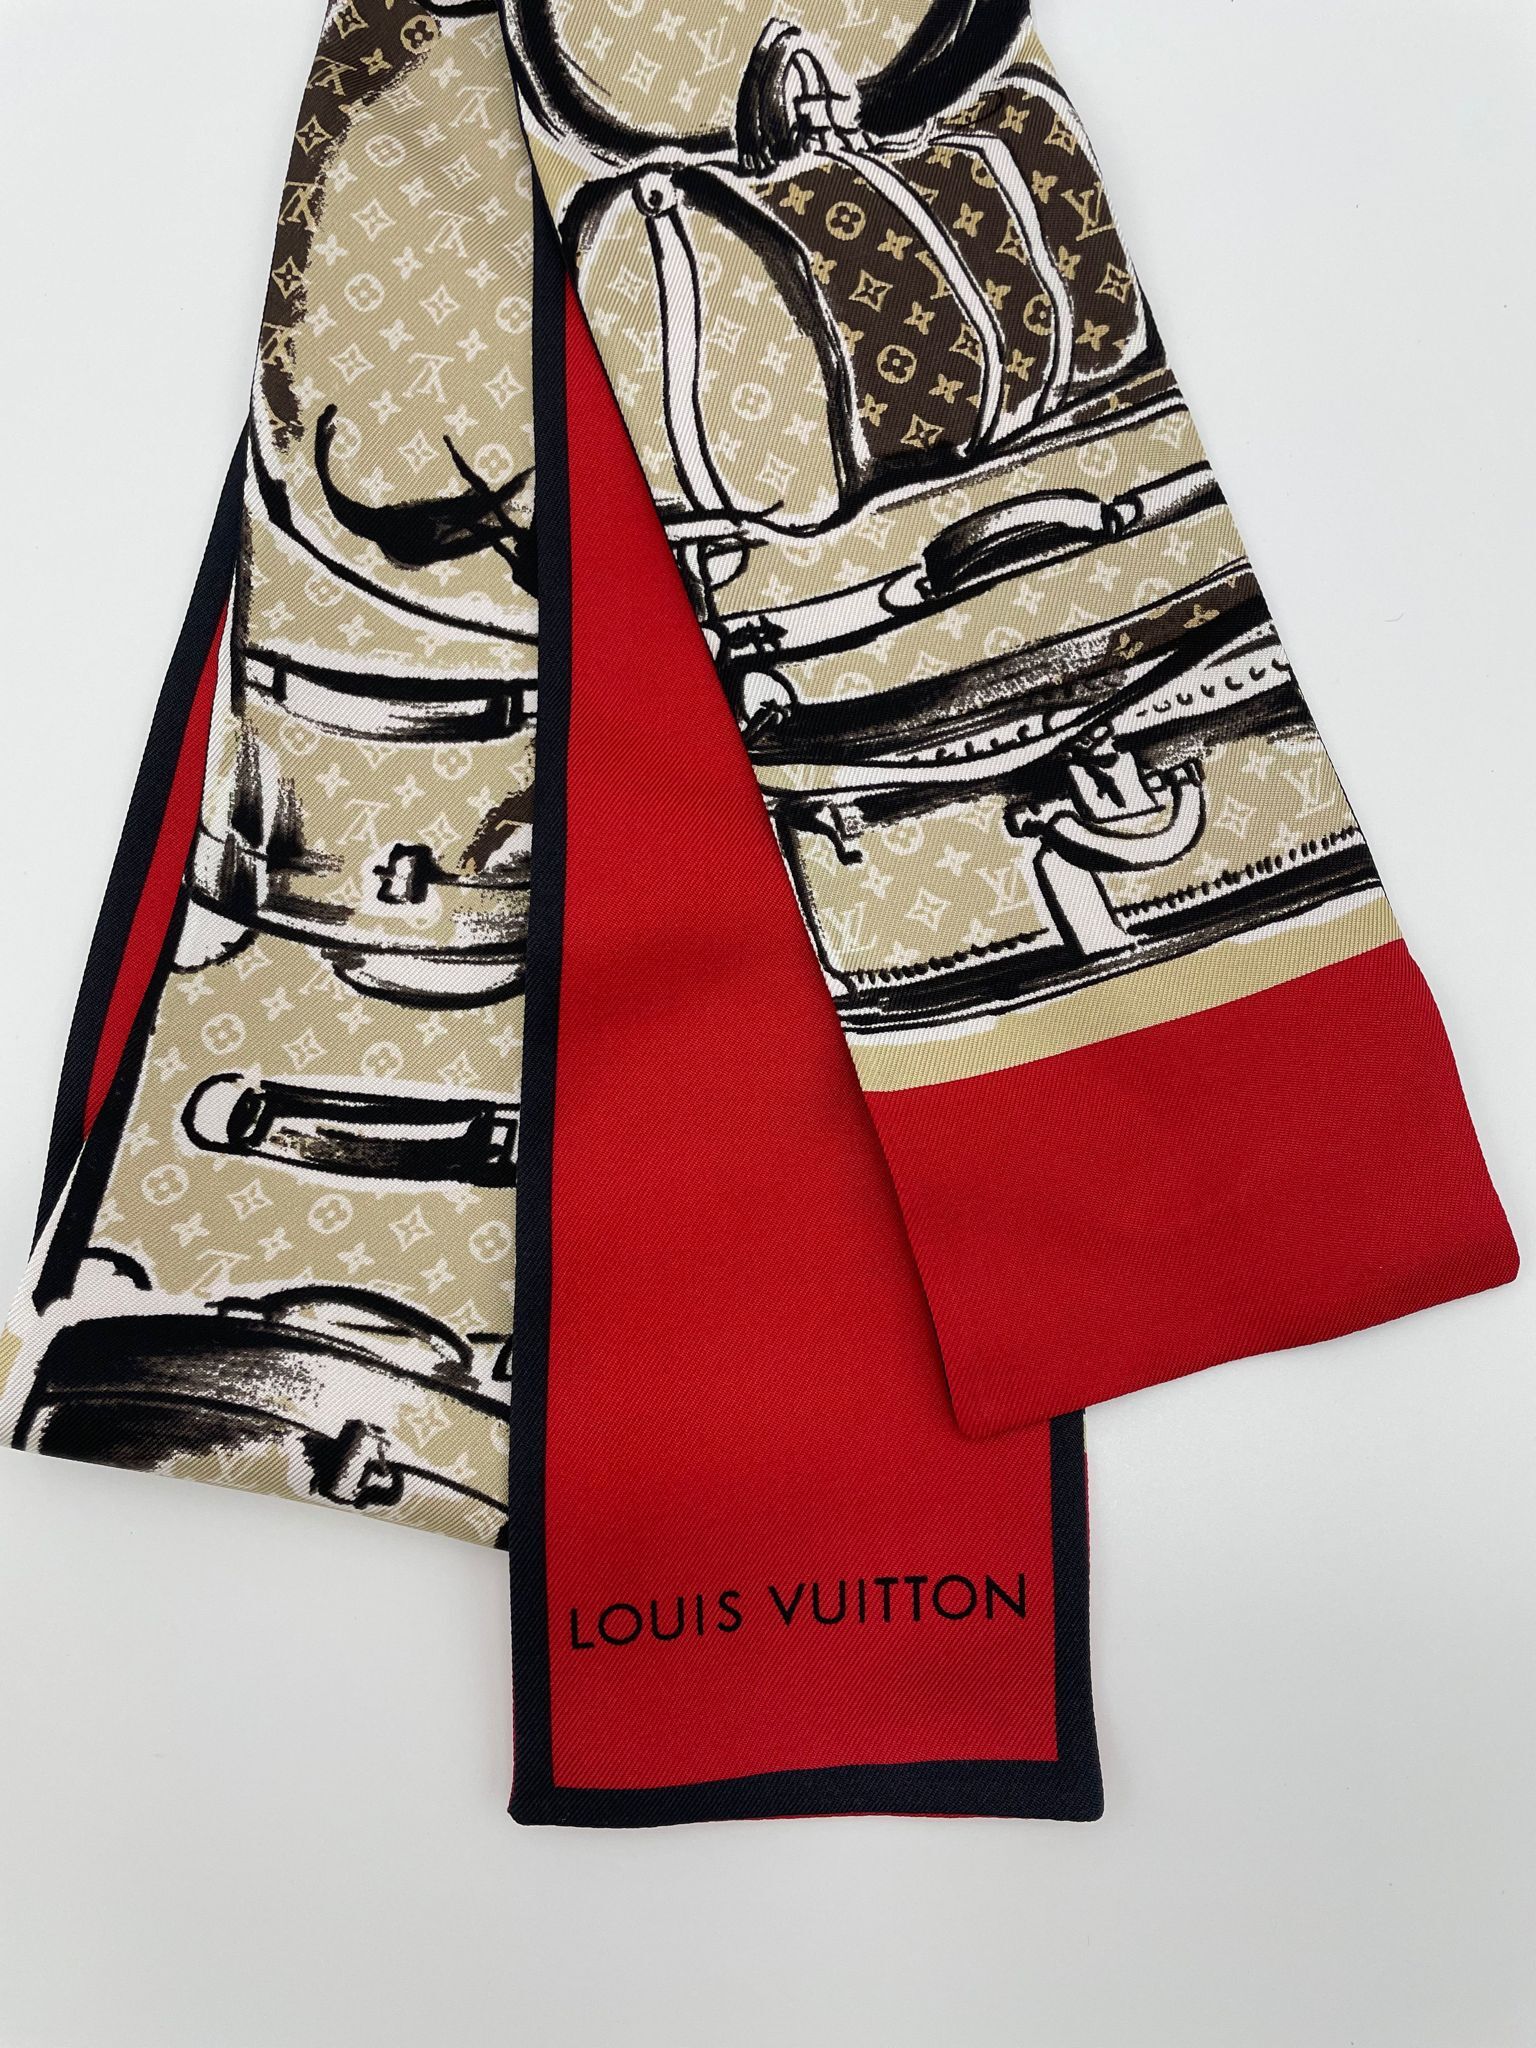 Louis Vuitton Twilly Scarf, Red and Beige, New in Box GA001